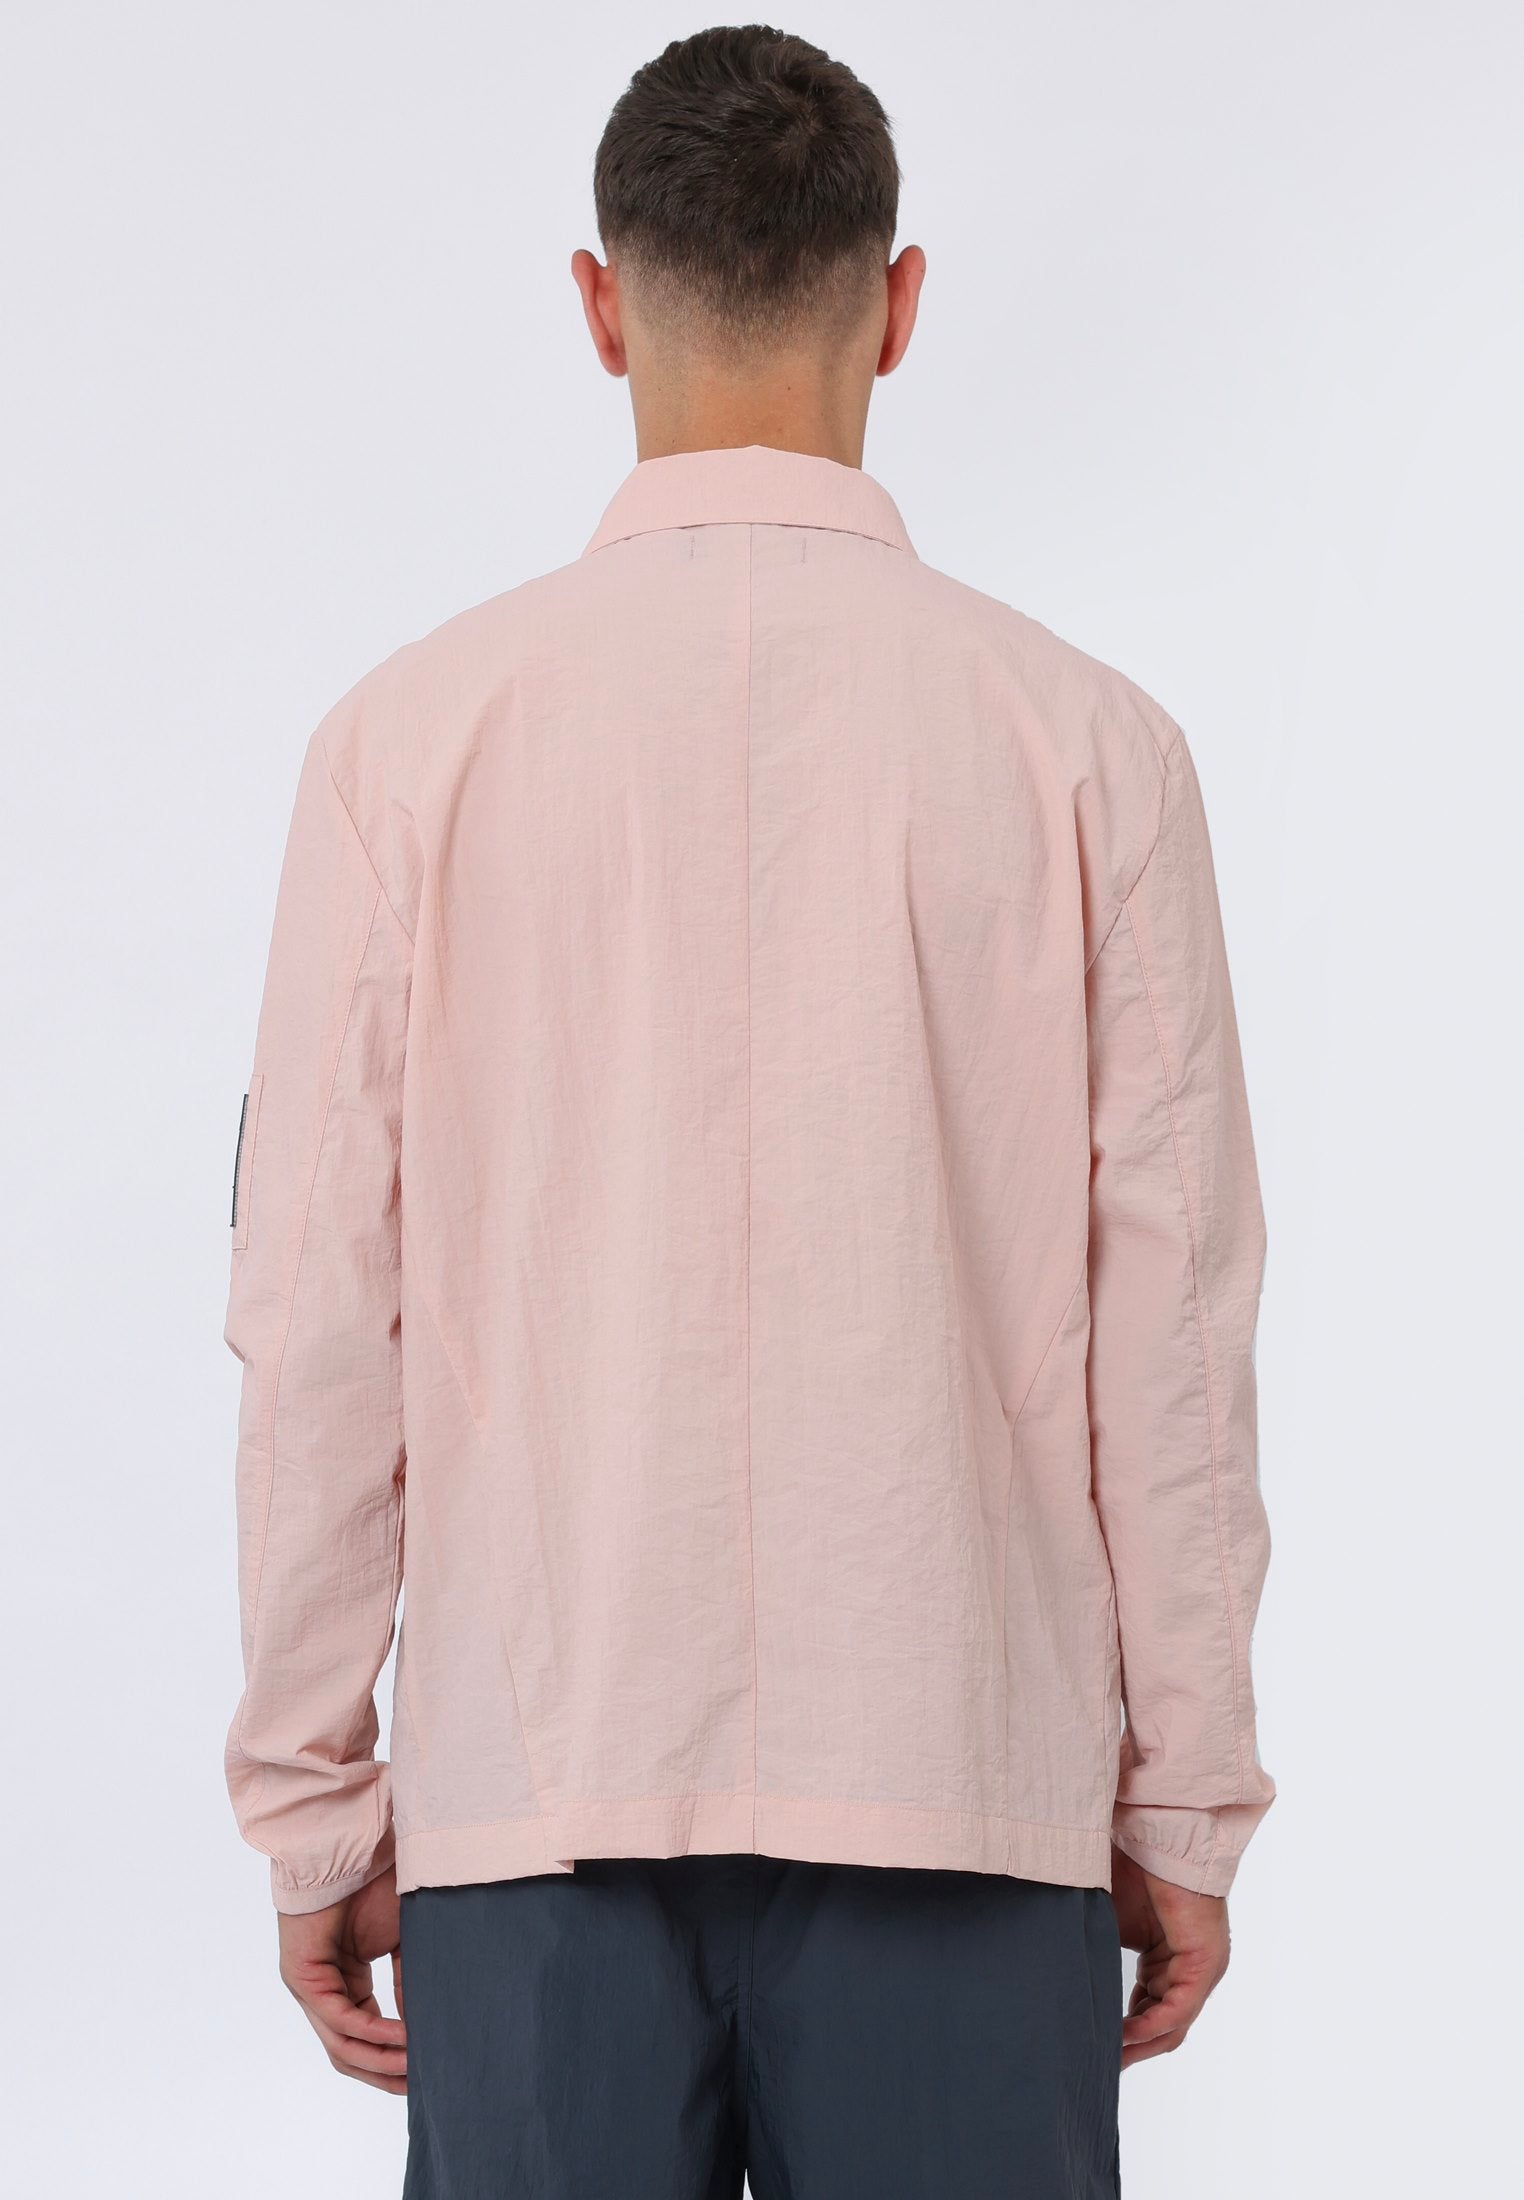 TERRACE OVERSHIRT PALE PINK